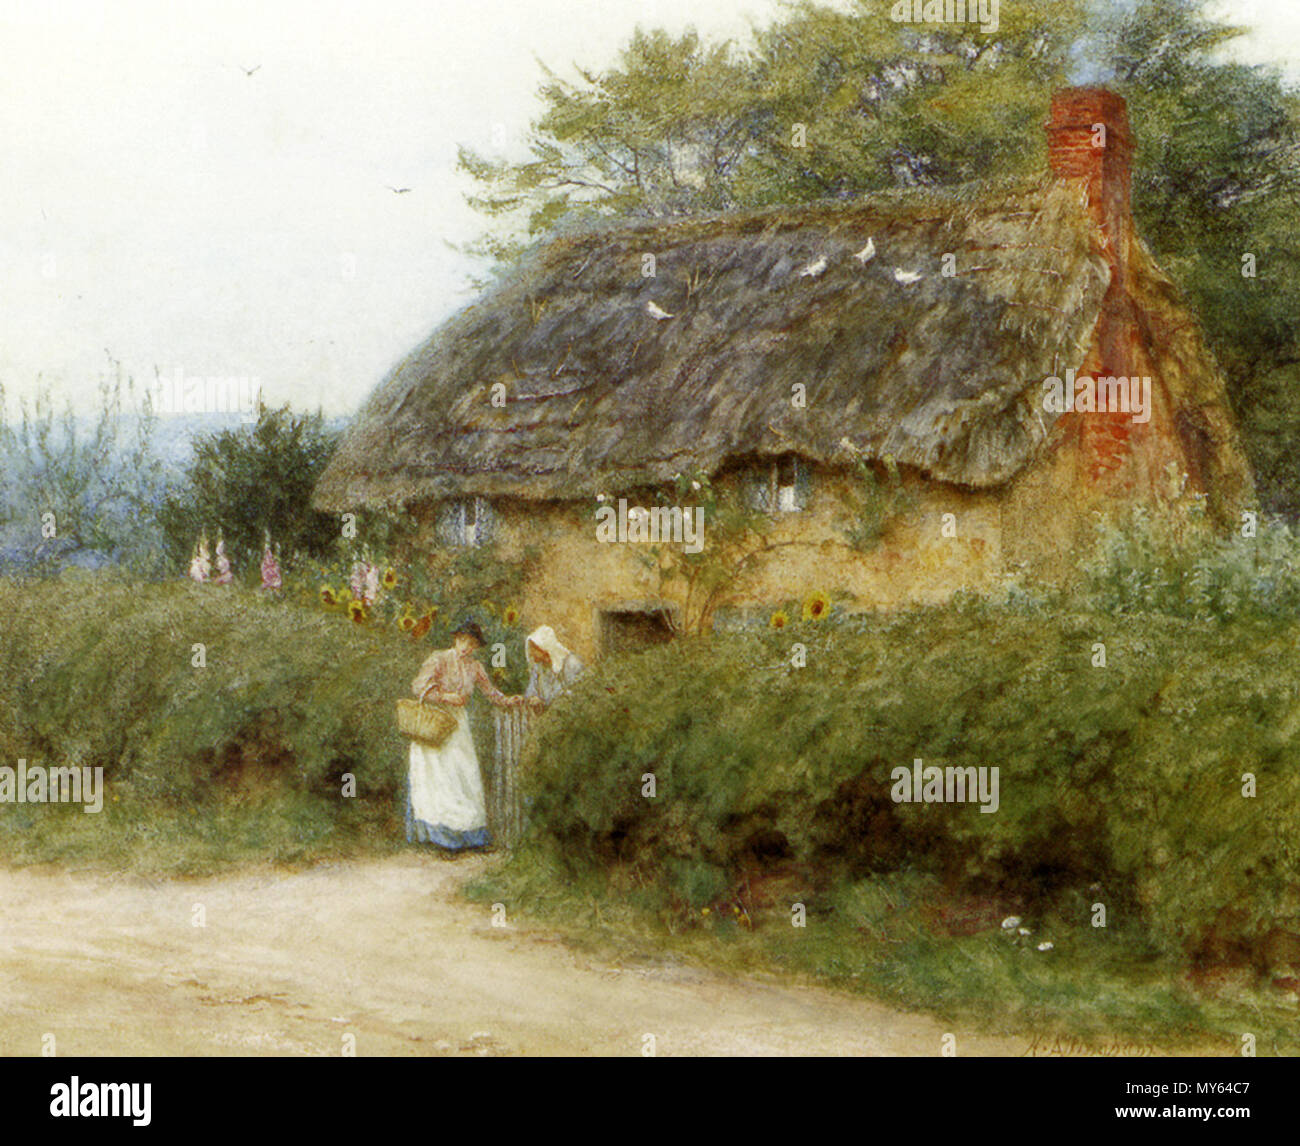 . Helen Allingham (26 September 1848 - 28 September 1926), was a well-known watercolour painter illustrator of the Victorian era. A Cottage With Sunflowers . 2008 (upload date).   Helen Allingham  (1848–1926)     Alternative names H. Paterson  Description British painter and illustrator  Date of birth/death 26 September 1848 28 September 1926  Location of birth/death Derbyshire Haslemere  Authority control  : Q444581 VIAF: 34727518 ISNI: 0000 0000 8371 5642 ULAN: 500003736 LCCN: n50021031 GND: 119120836 WorldCat 34 Allingham Helen A Cottage With Sunflowers At Peaslake Stock Photo